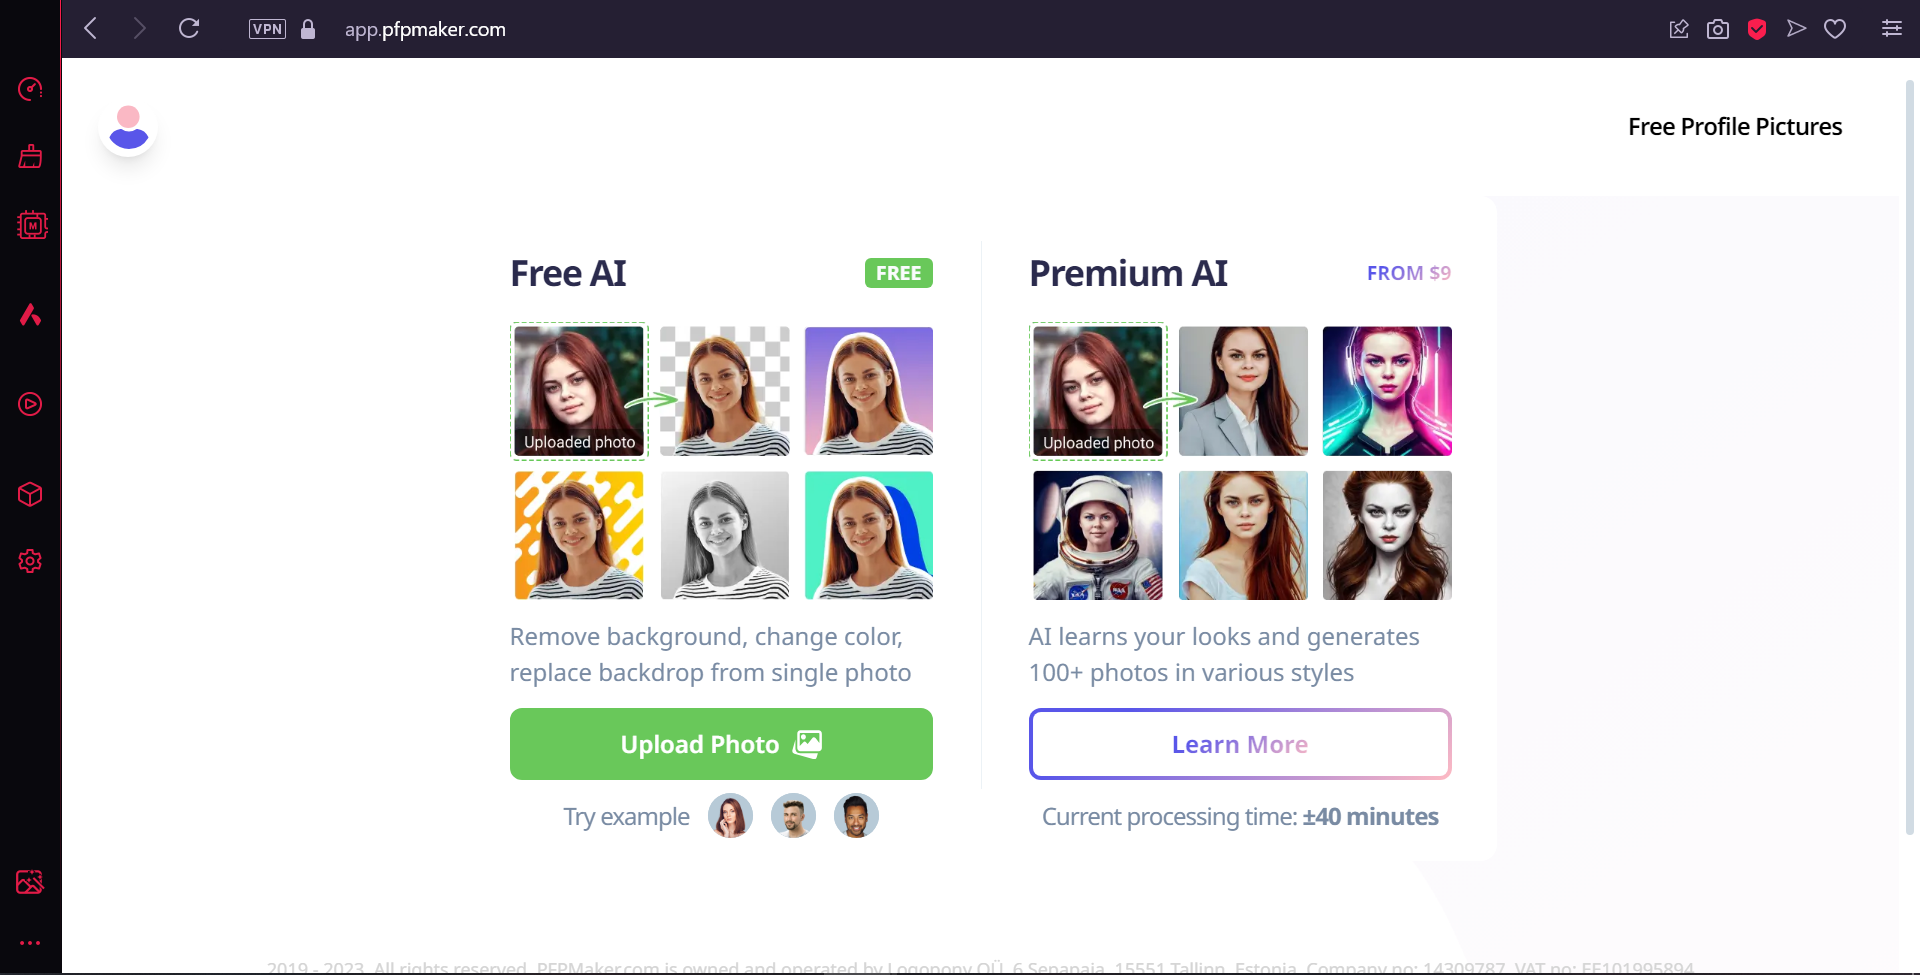 PFPMaker website showing various AI-generated profile picture options.